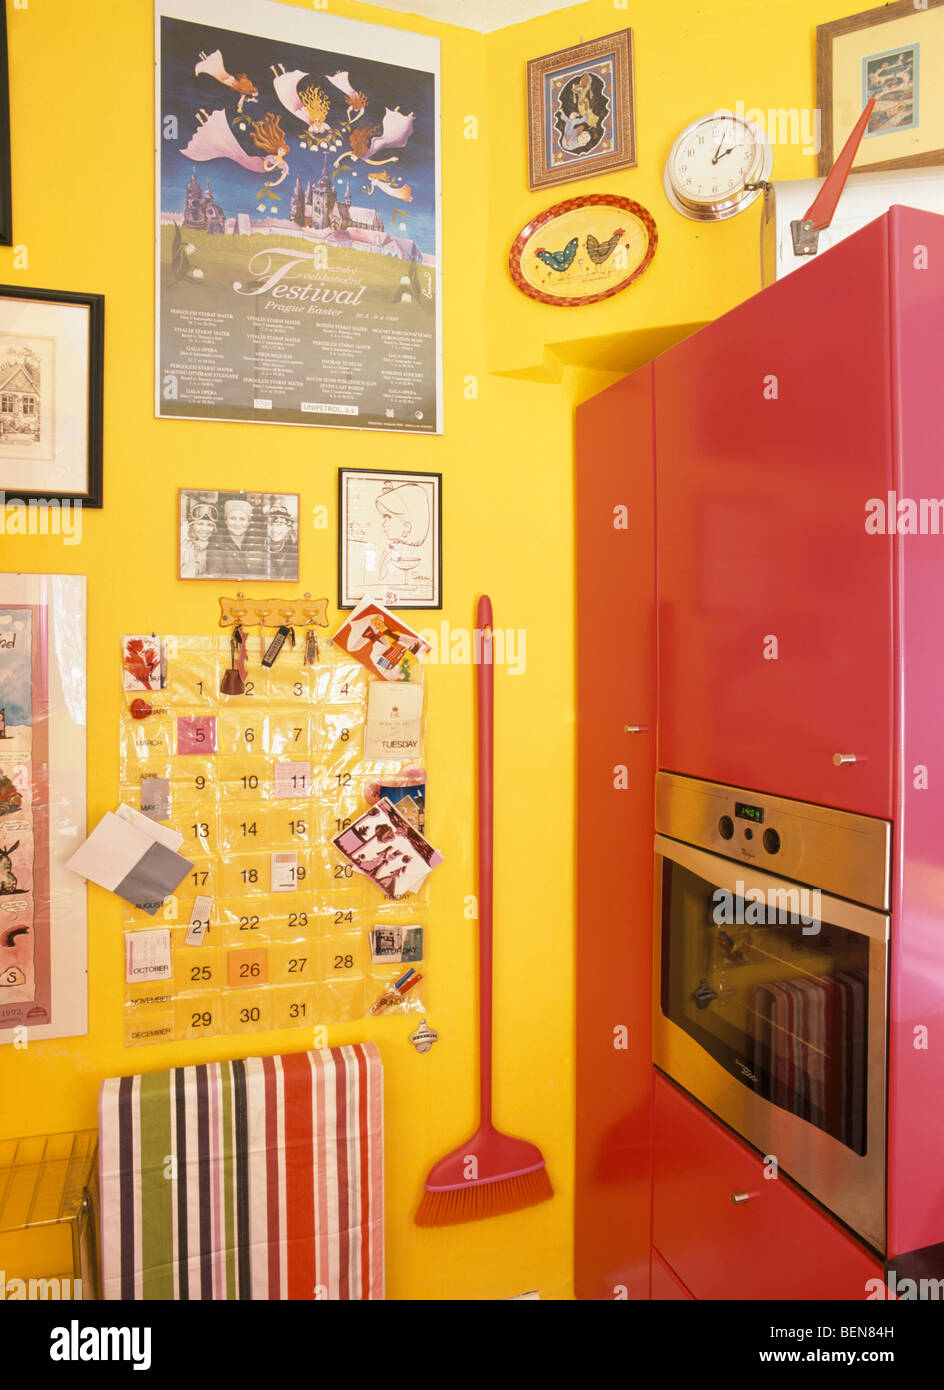 Pictures and red broom on wall beside oven in fitted pink unit in bright yellow kitchen Stock Photo